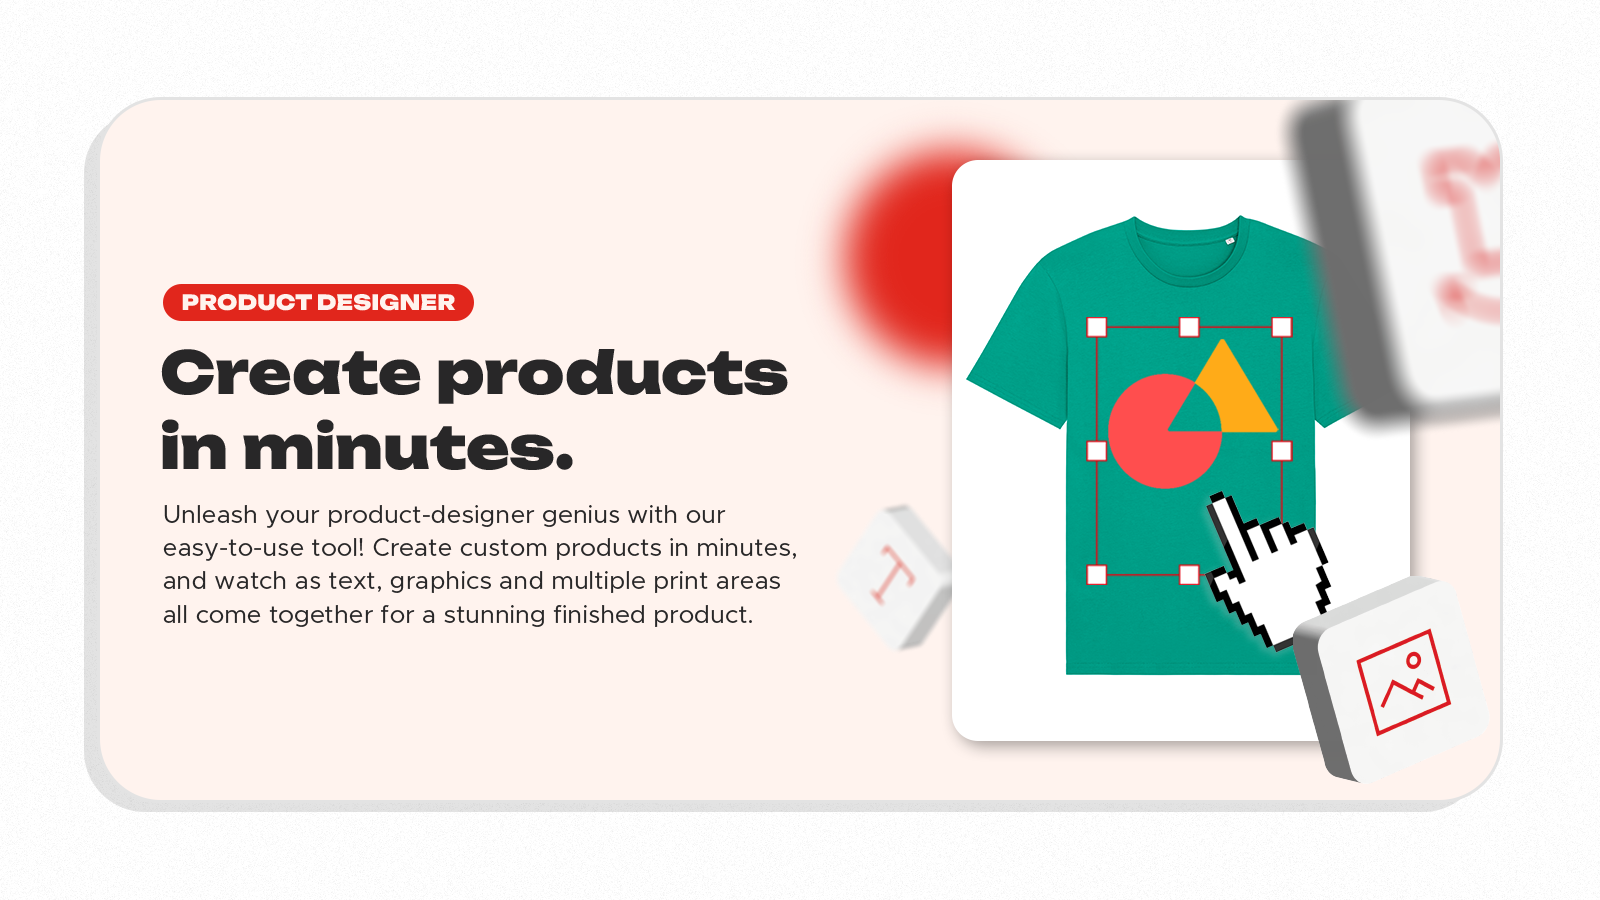 Create products in minutes. An easy-to-use product designer.